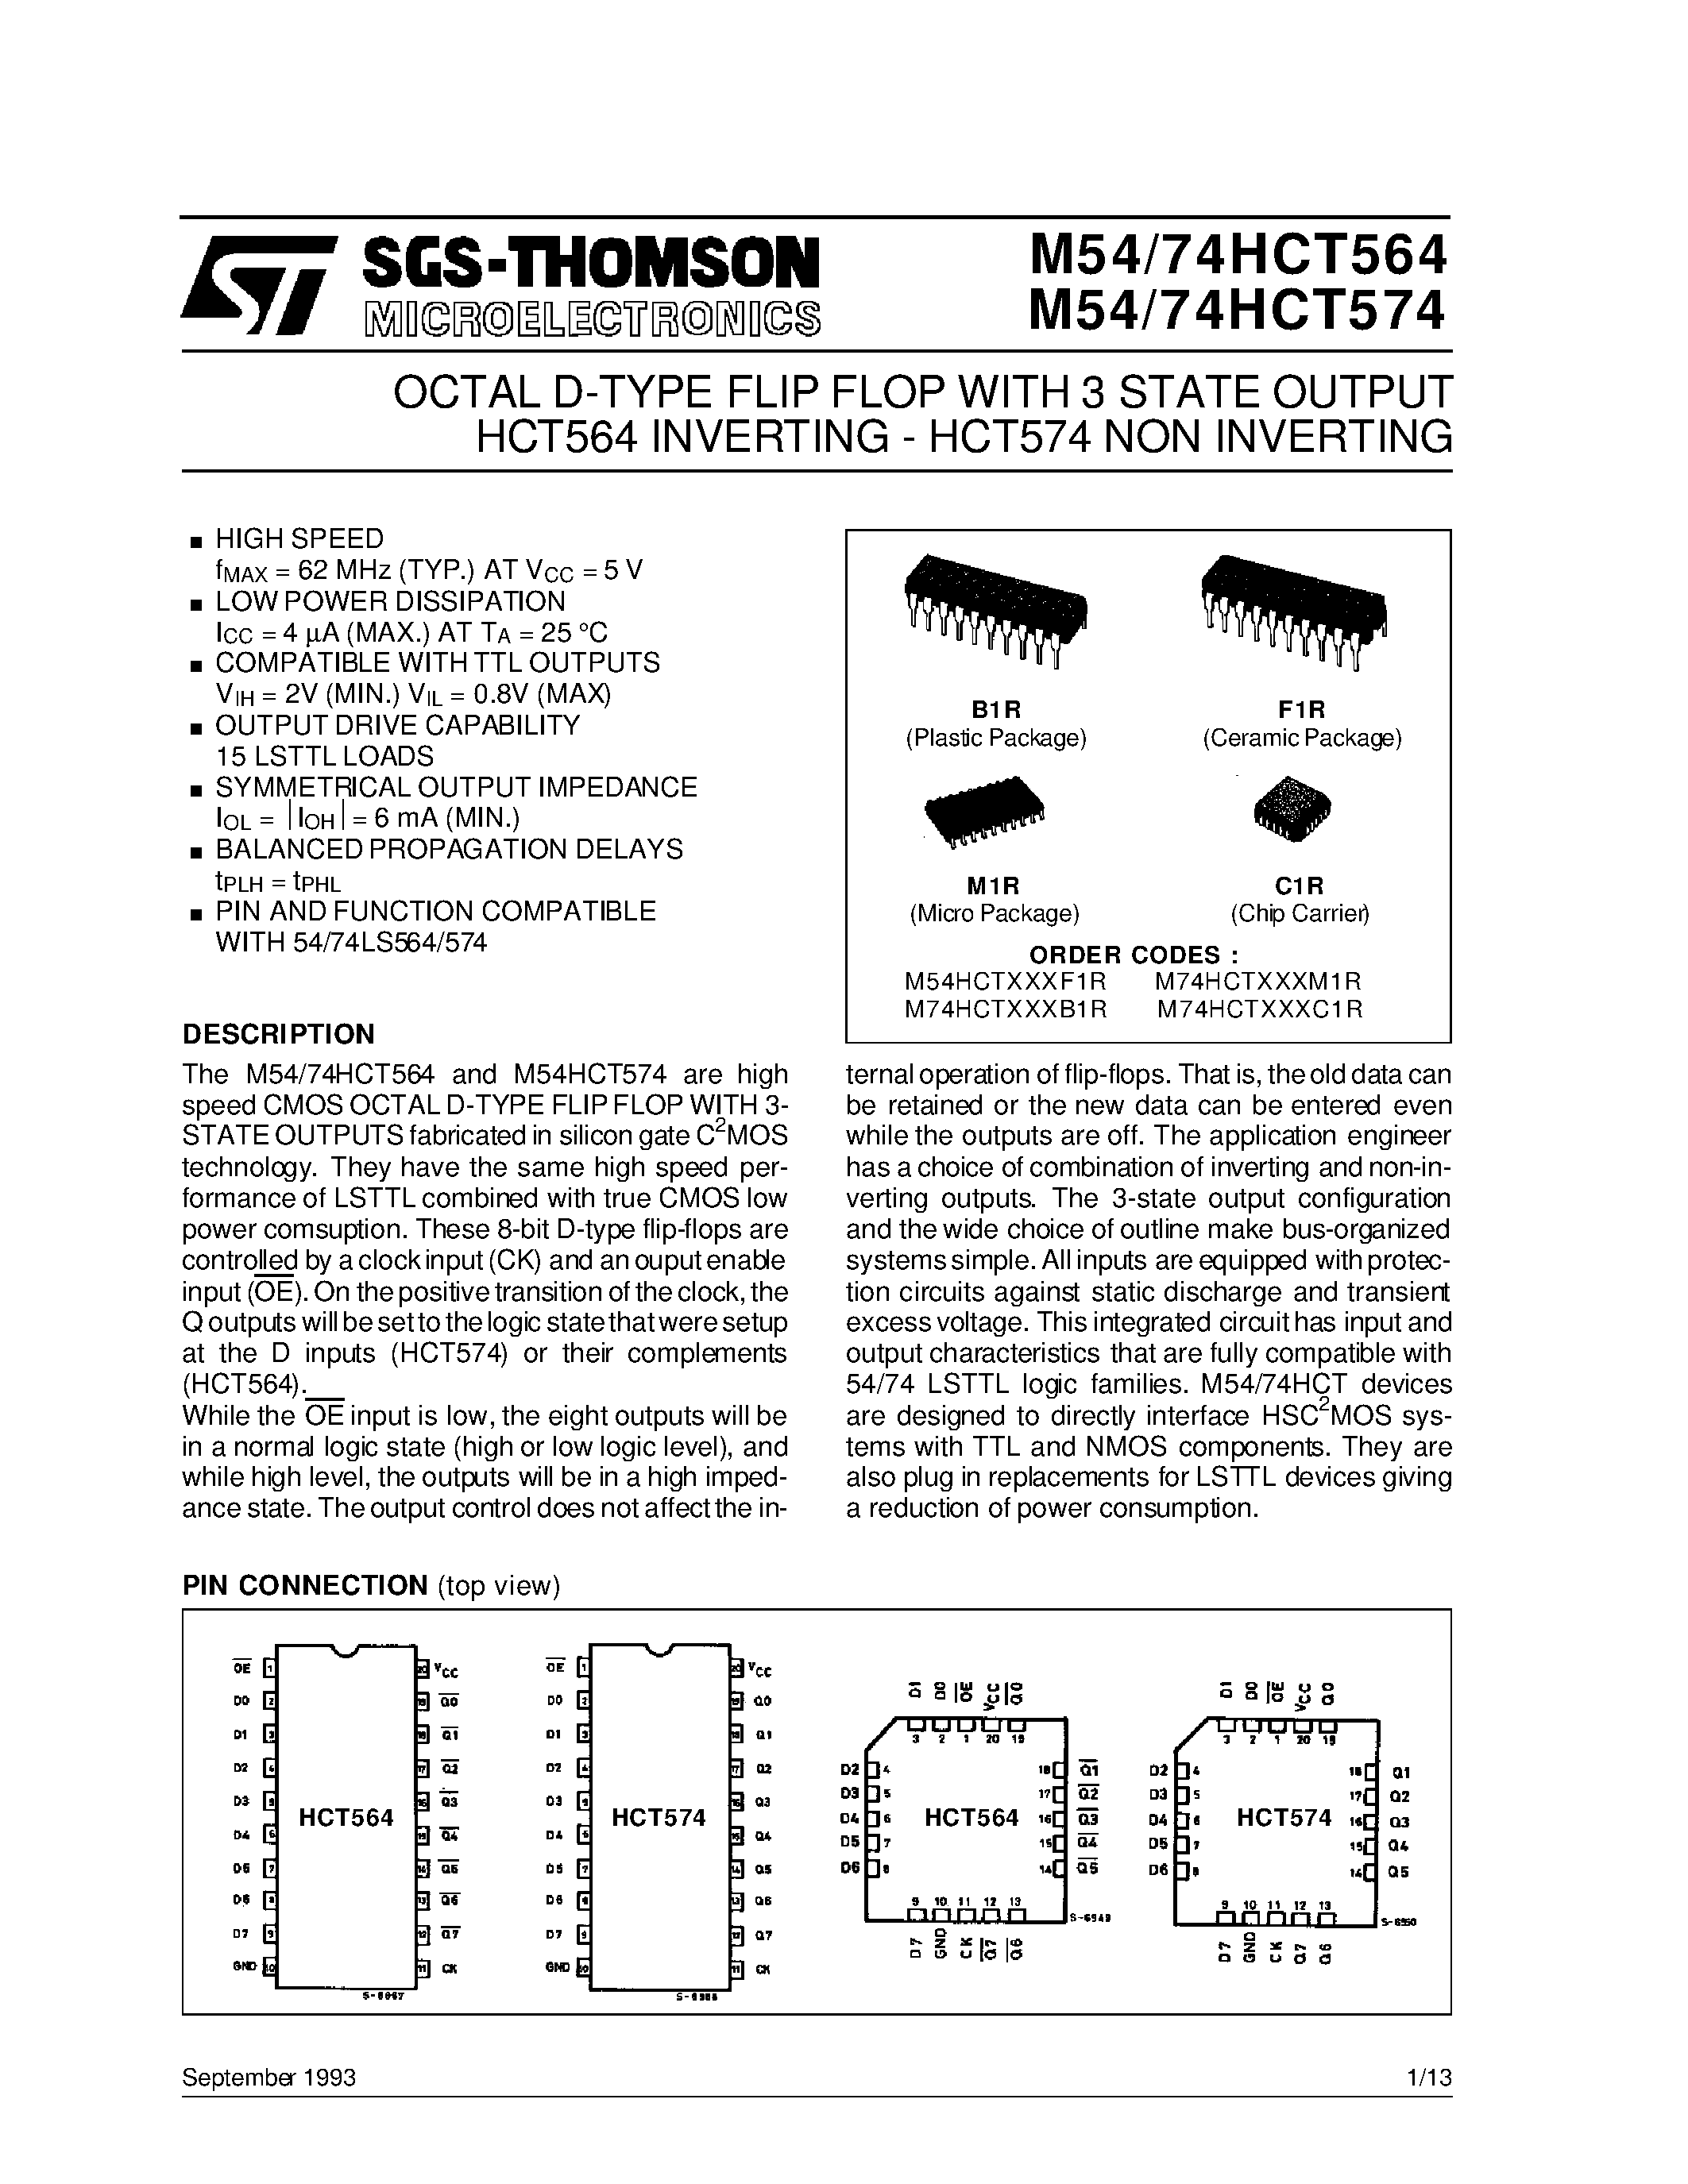 Datasheet M74HCT564 - OCTAL D-TYPE FLIP FLOP WITH 3 STATE OUTPUT HCT564 INVERTING - HCT574 NON INVERTING page 1